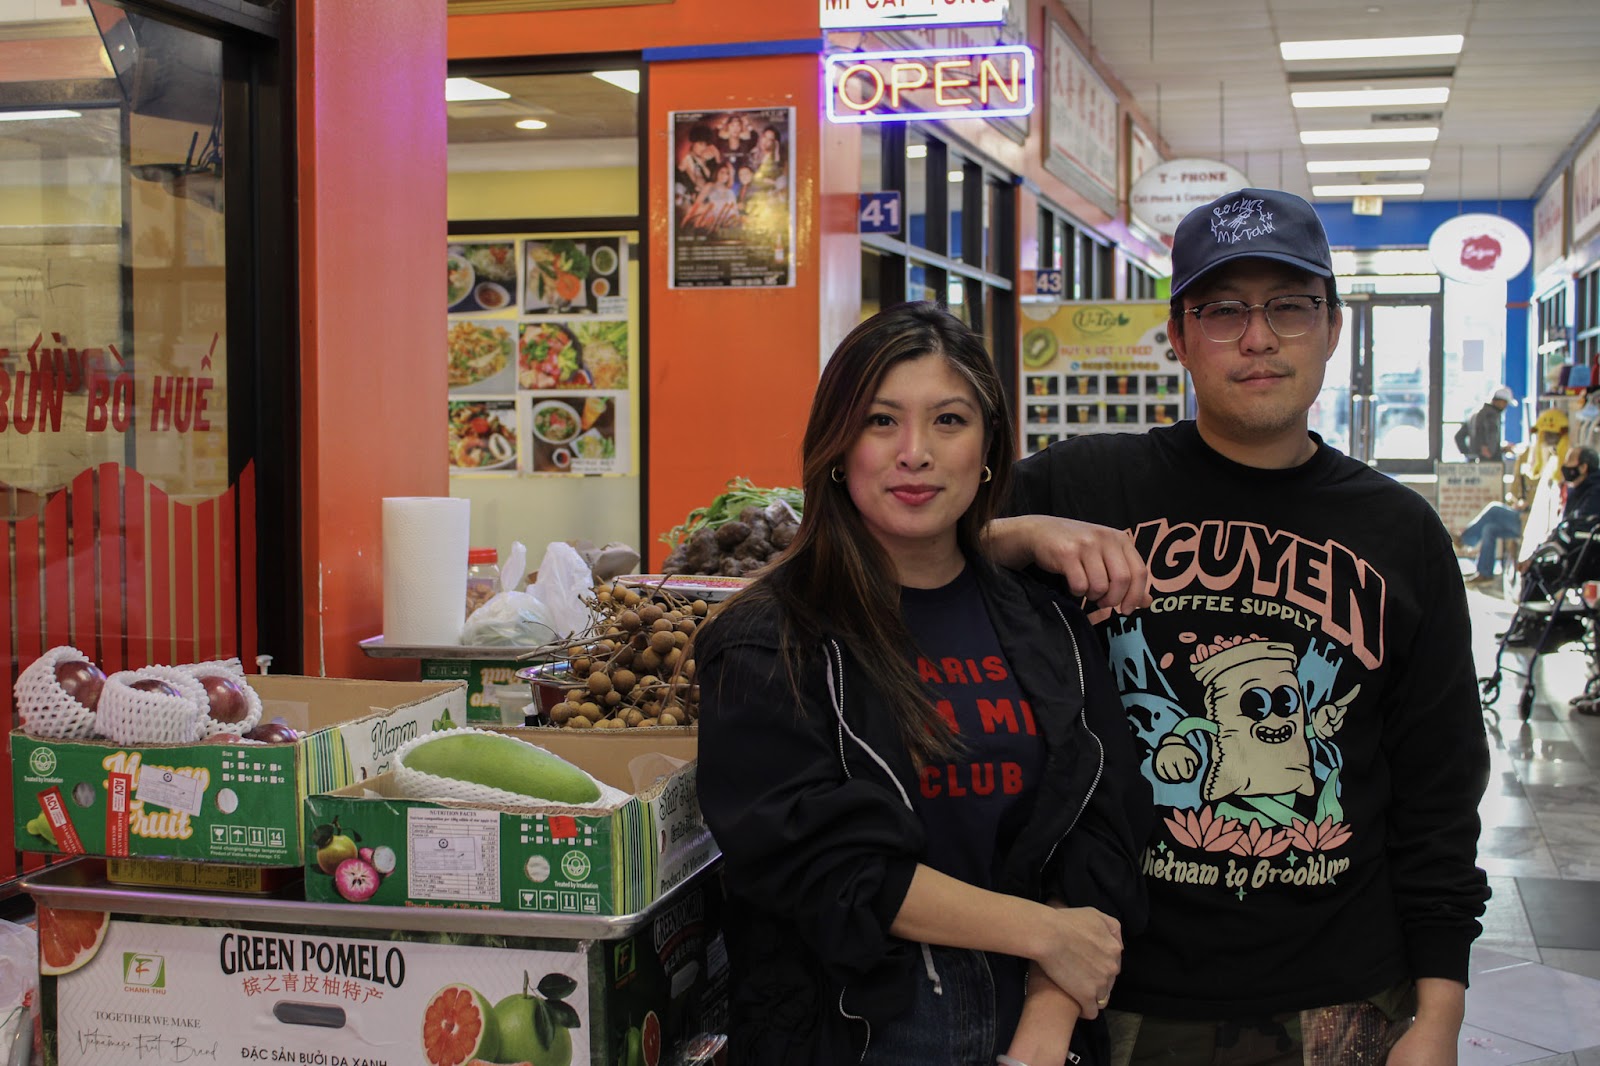 Denise Nguyen and Victor Nguyen-Long, two Vietnamese American activists who are working to support business owners at Eden Center